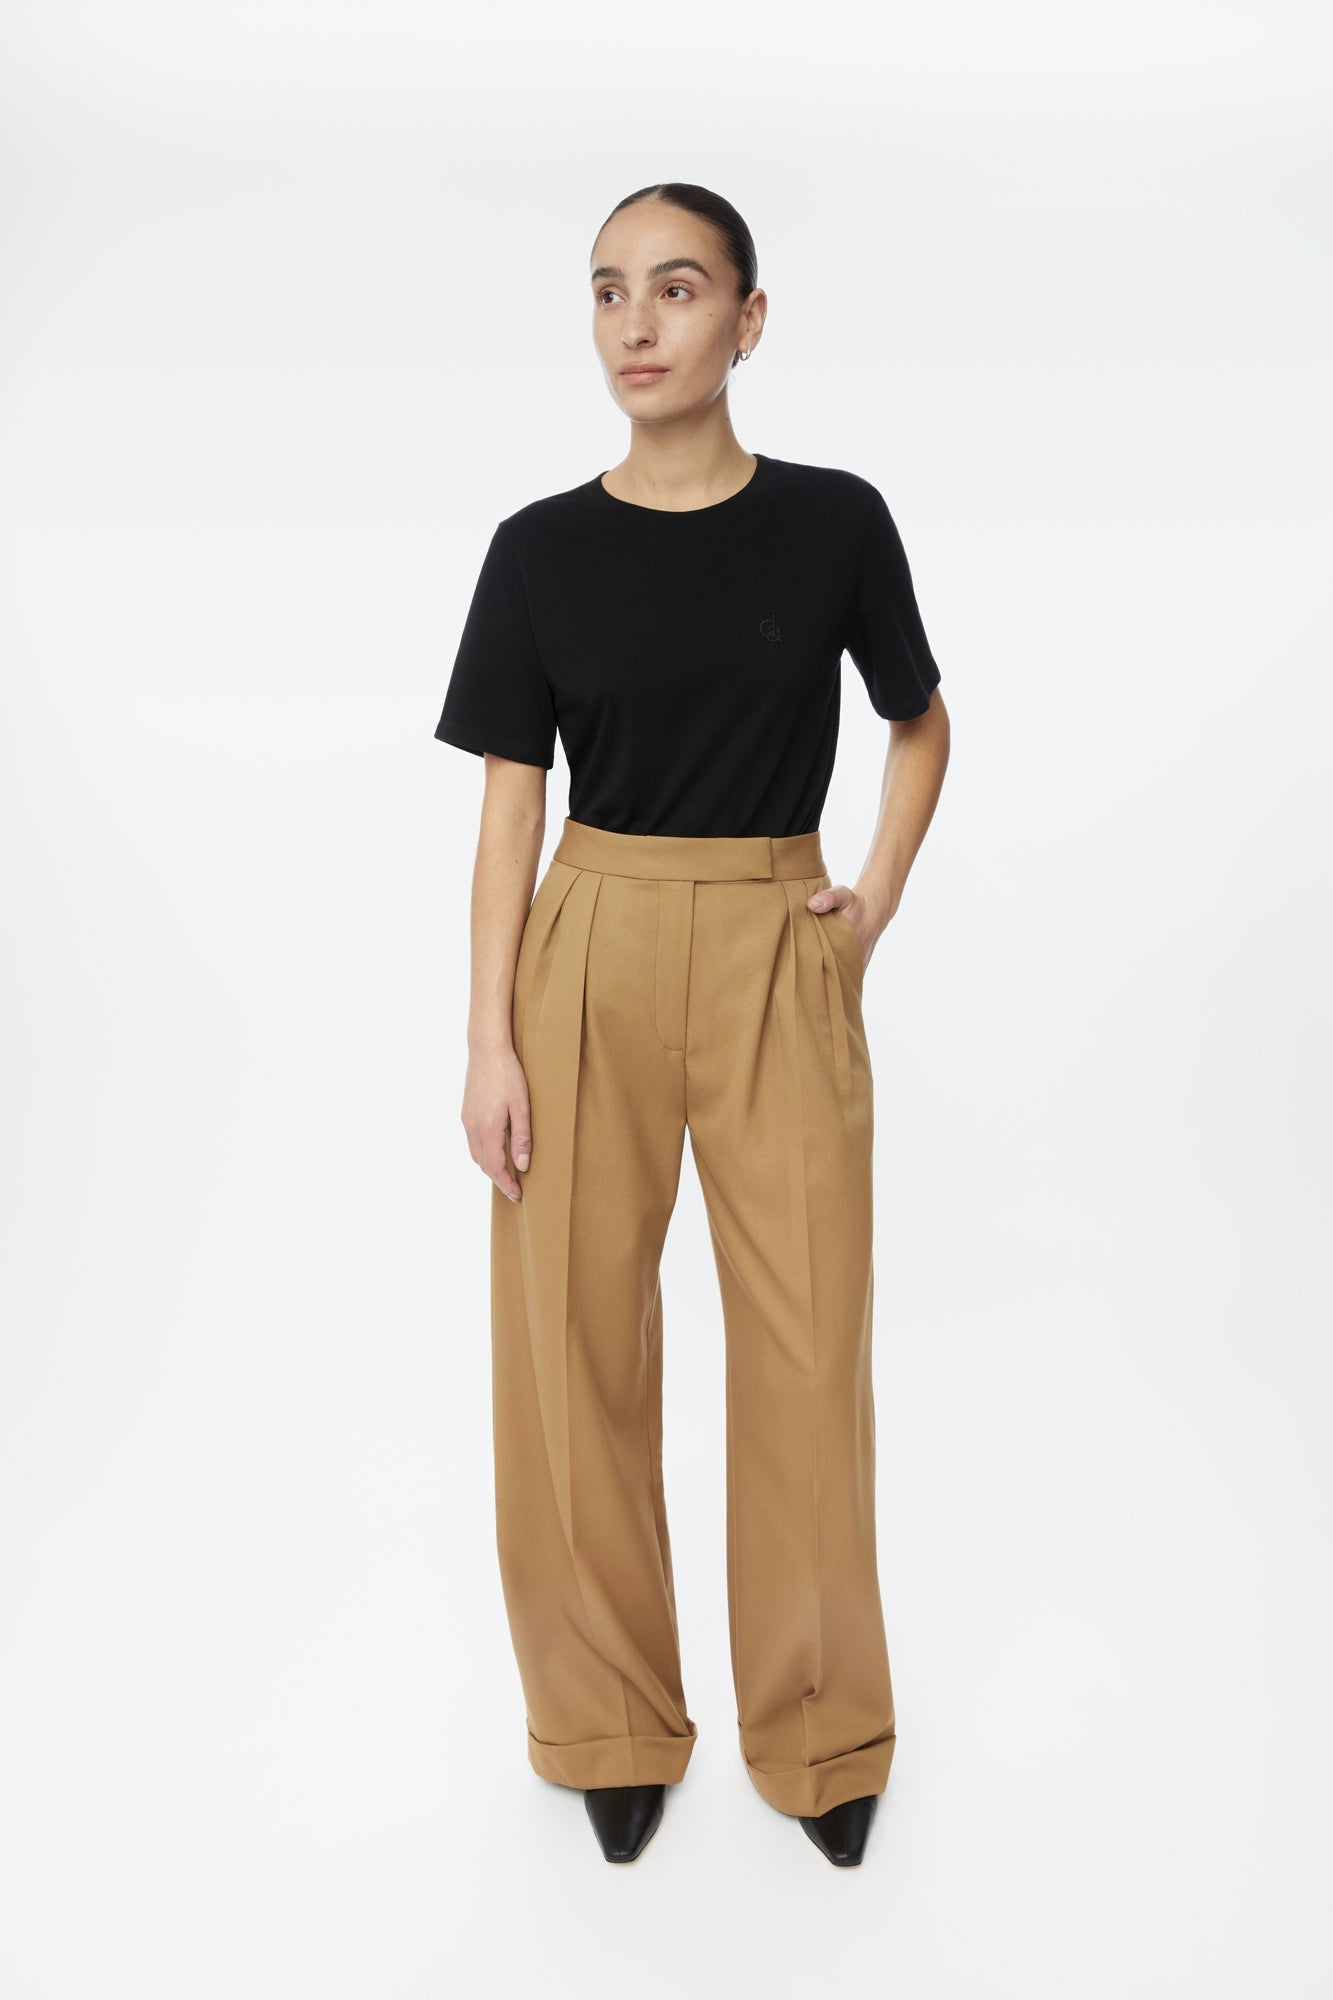 Pleated Wide Leg Trousers in 8 Ways - Outfit Ideas